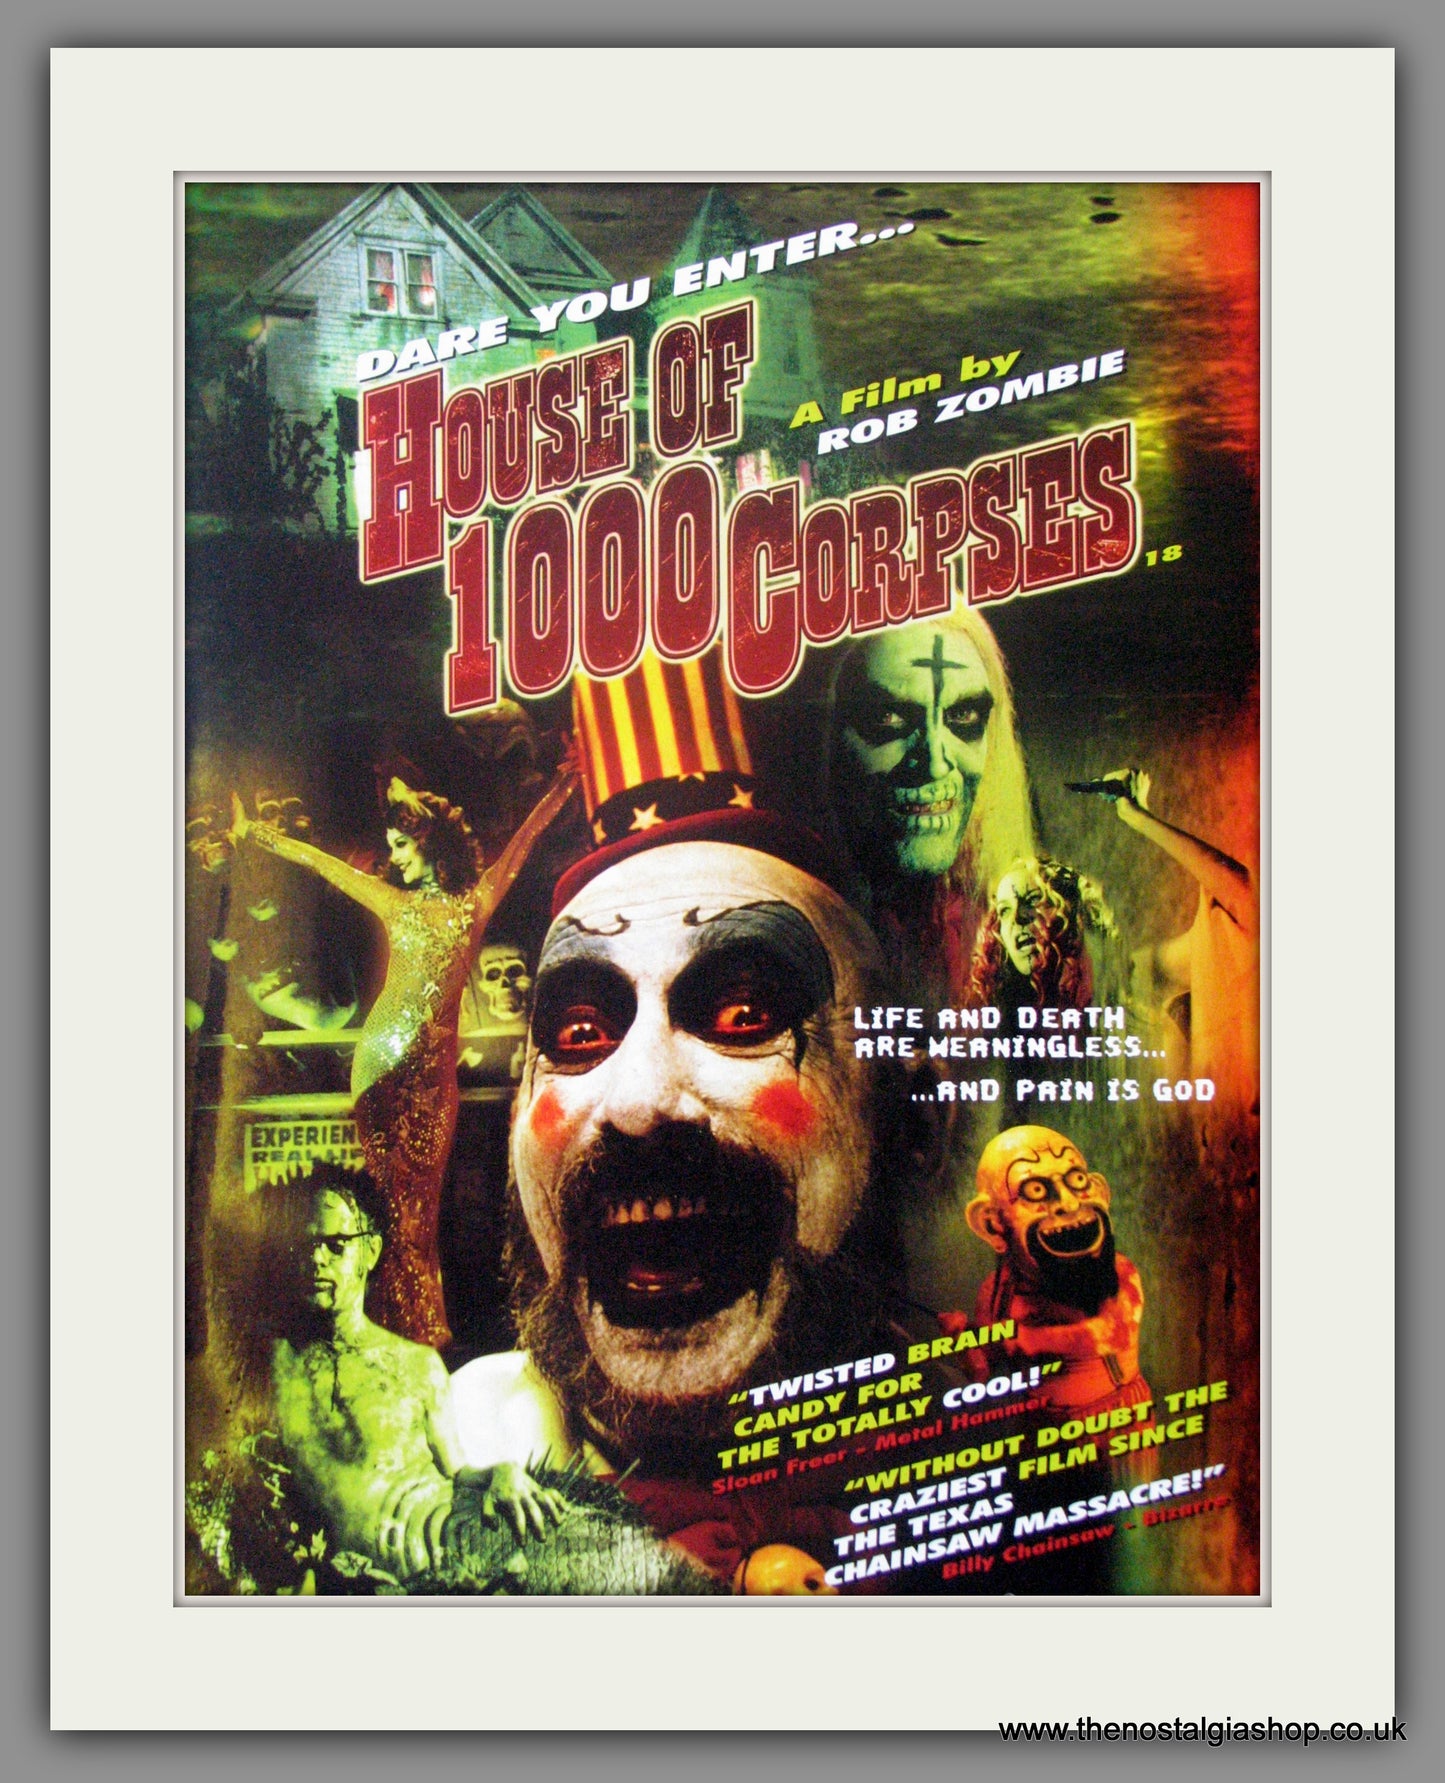 House Of a 1000 Corpses. Original Advert 2003 (ref AD50829)